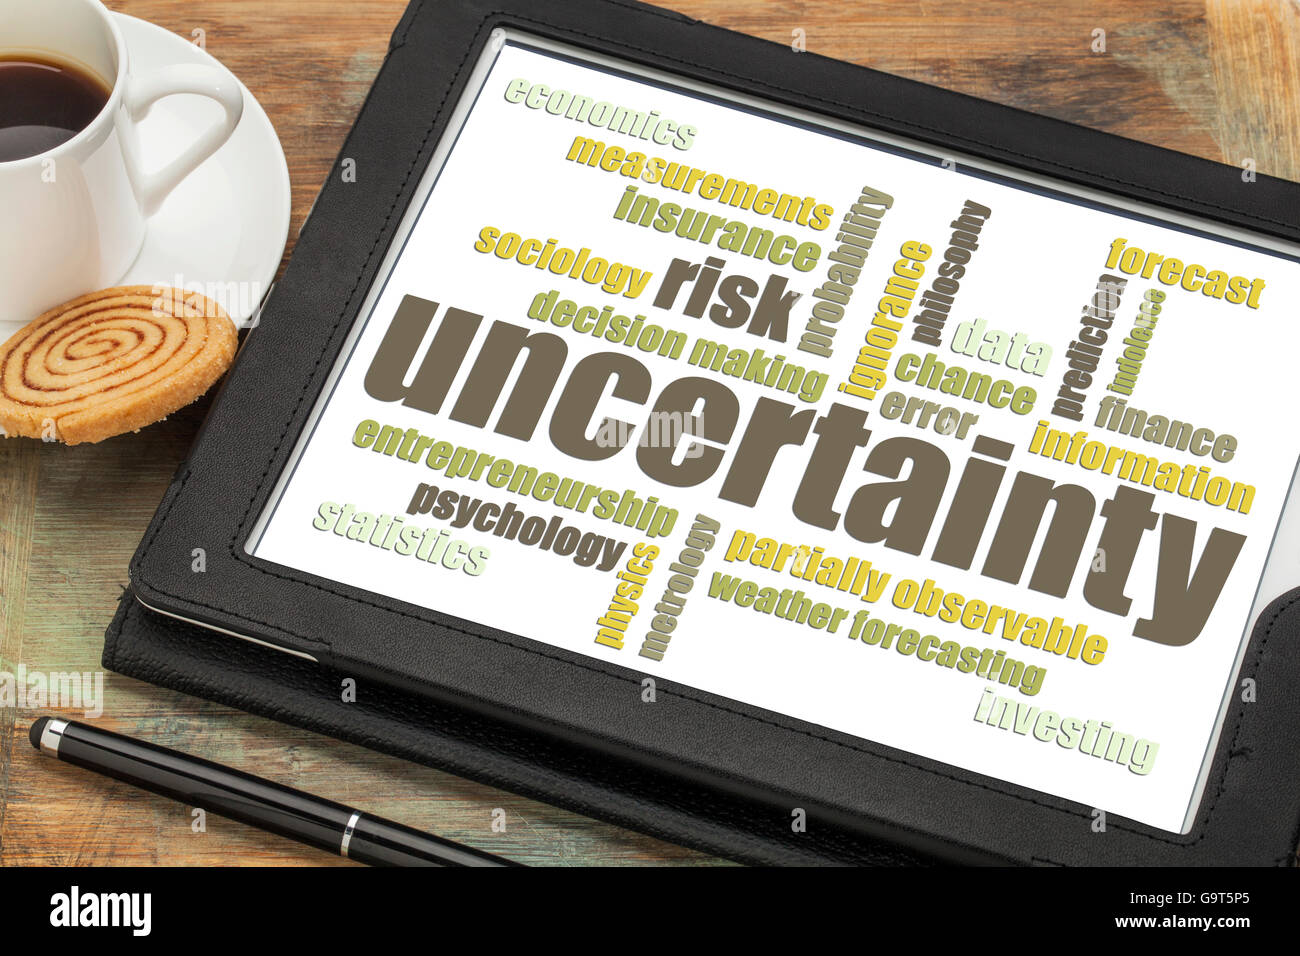 uncertainty and risk word cloud on a digital tablet with a cup of coffee Stock Photo